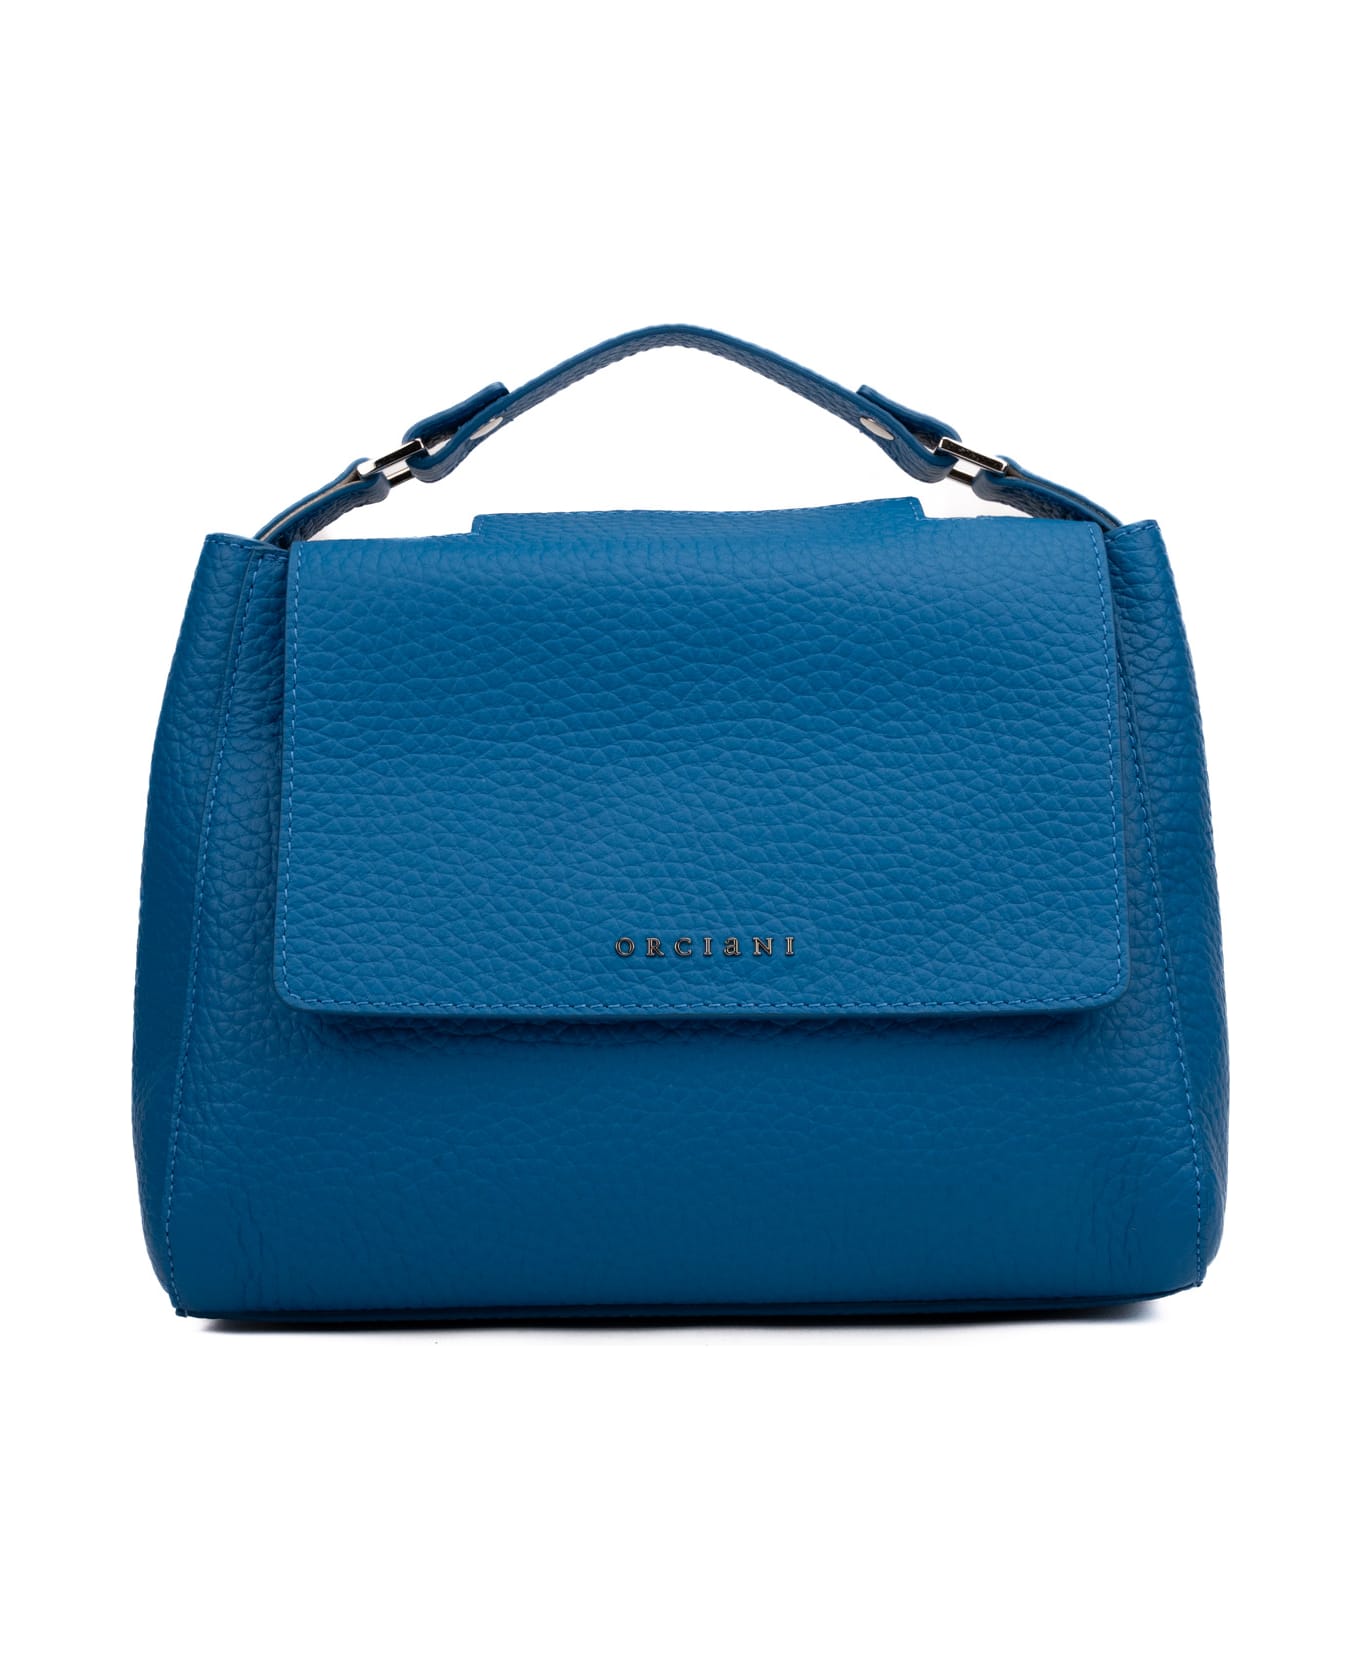 Orciani Small Sveva Soft Bag In Textured Leather - Blu elettrico トートバッグ